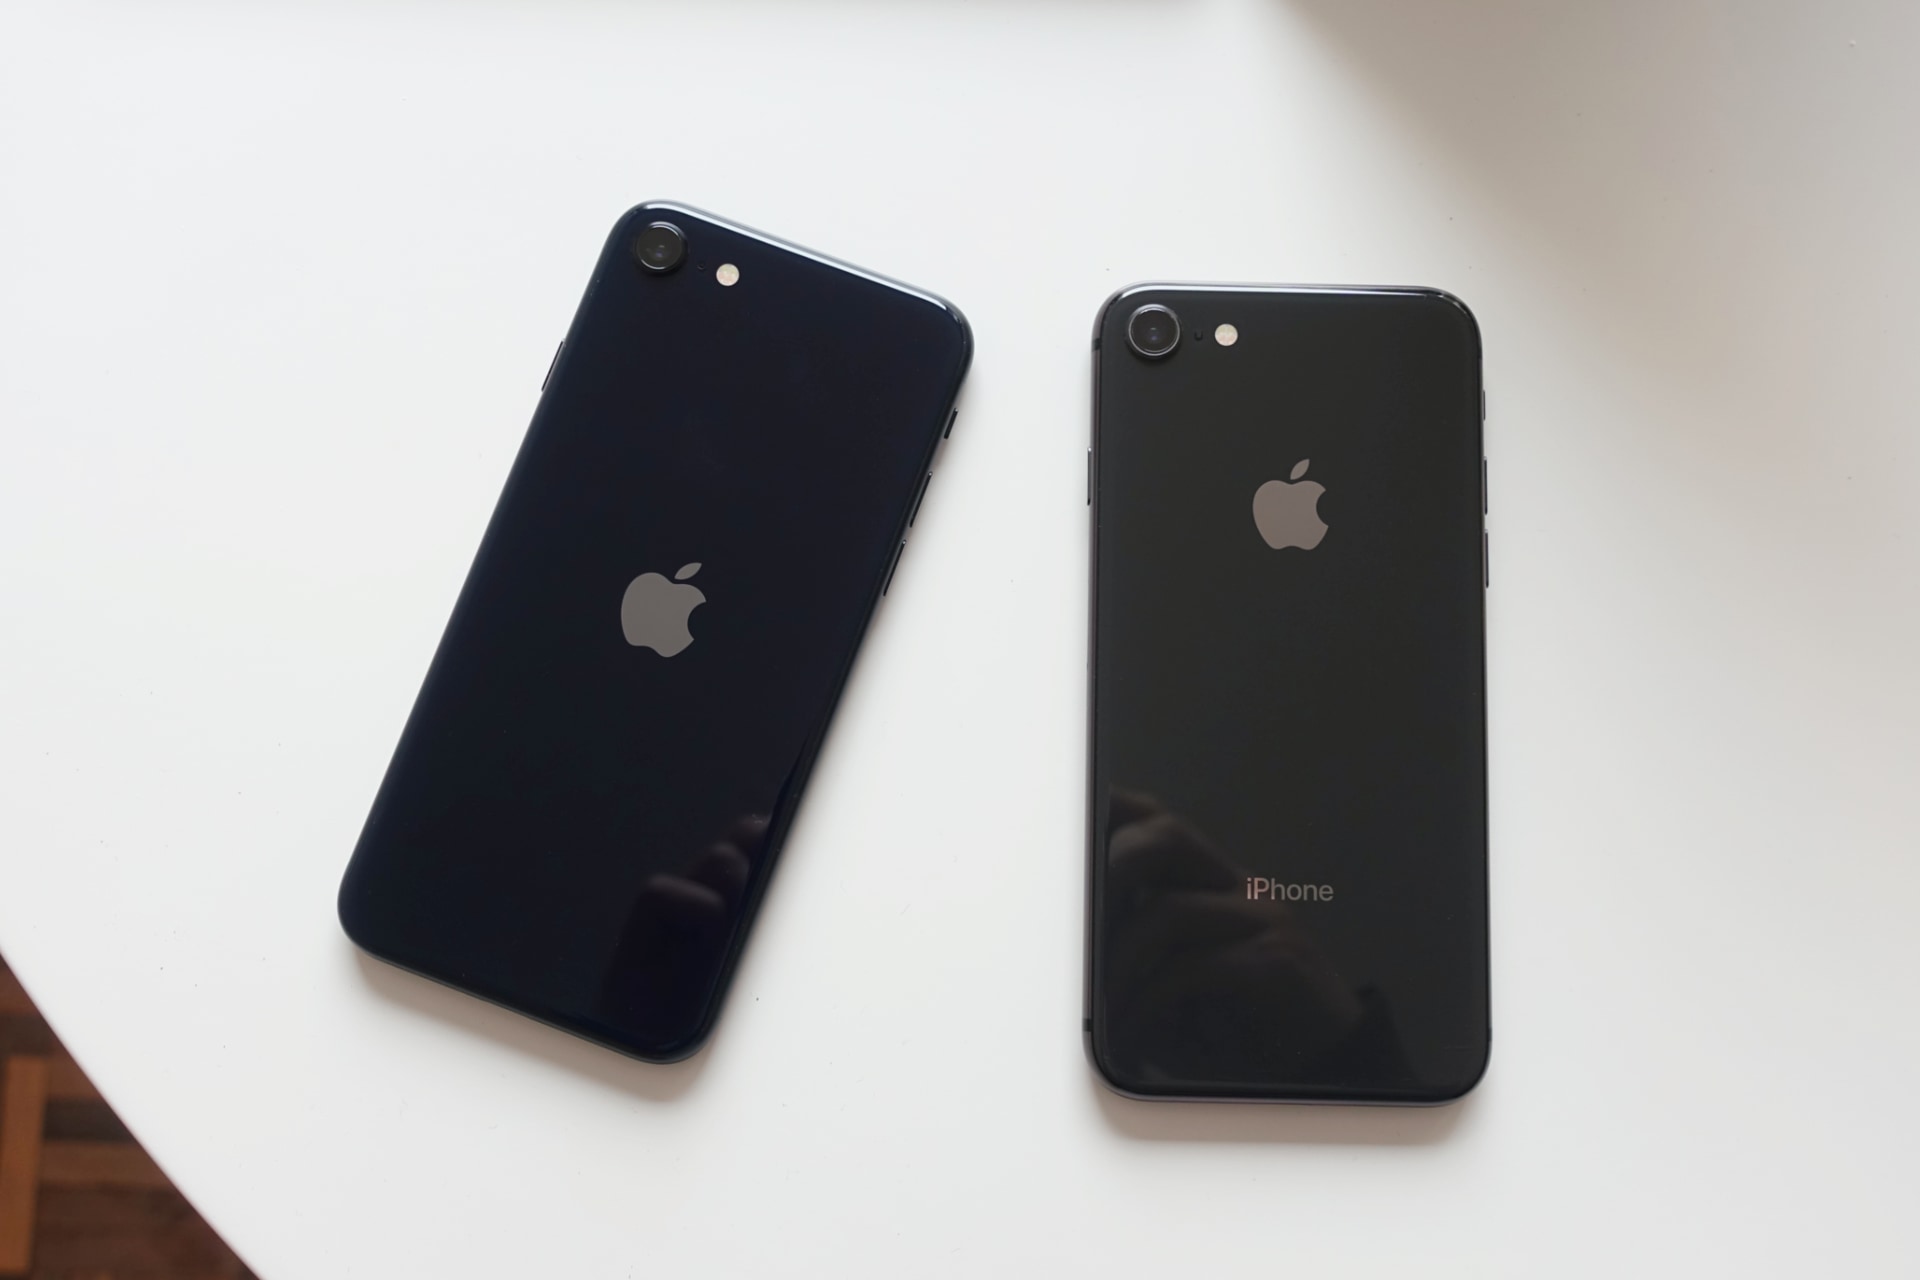 The new iPhone SE and an old iPhone 8, both black, but different blacks.